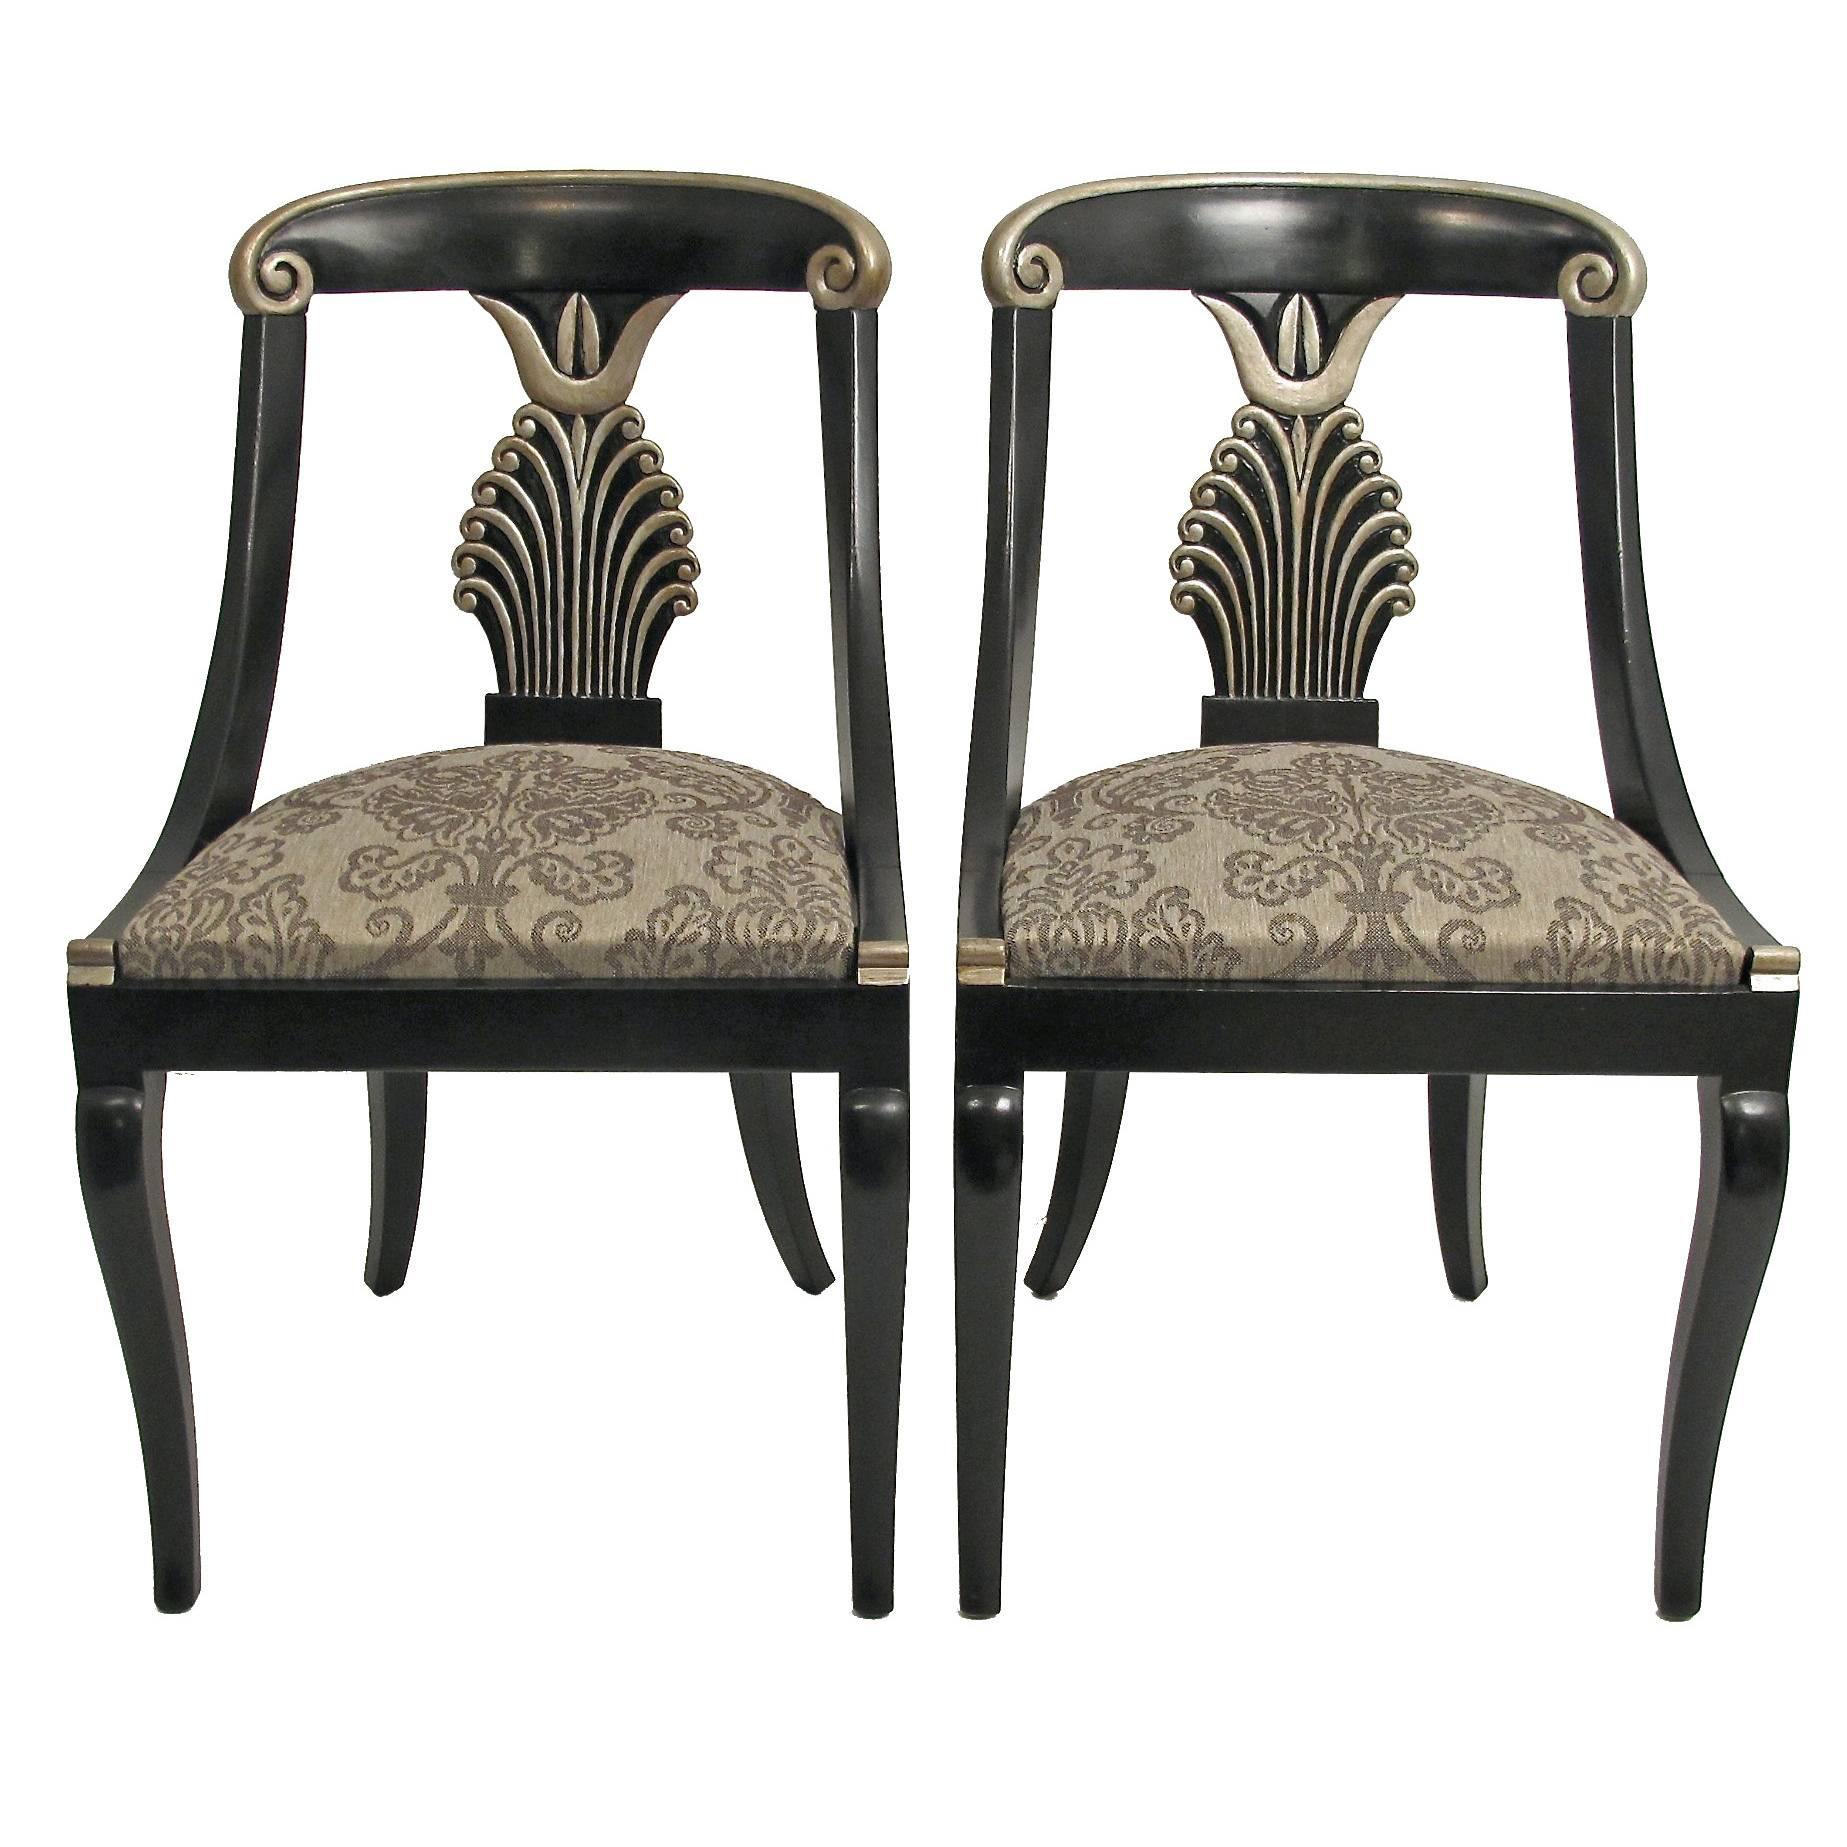   set of 4 Hollywood Regency Style Dining Chairs, (Set of Four)